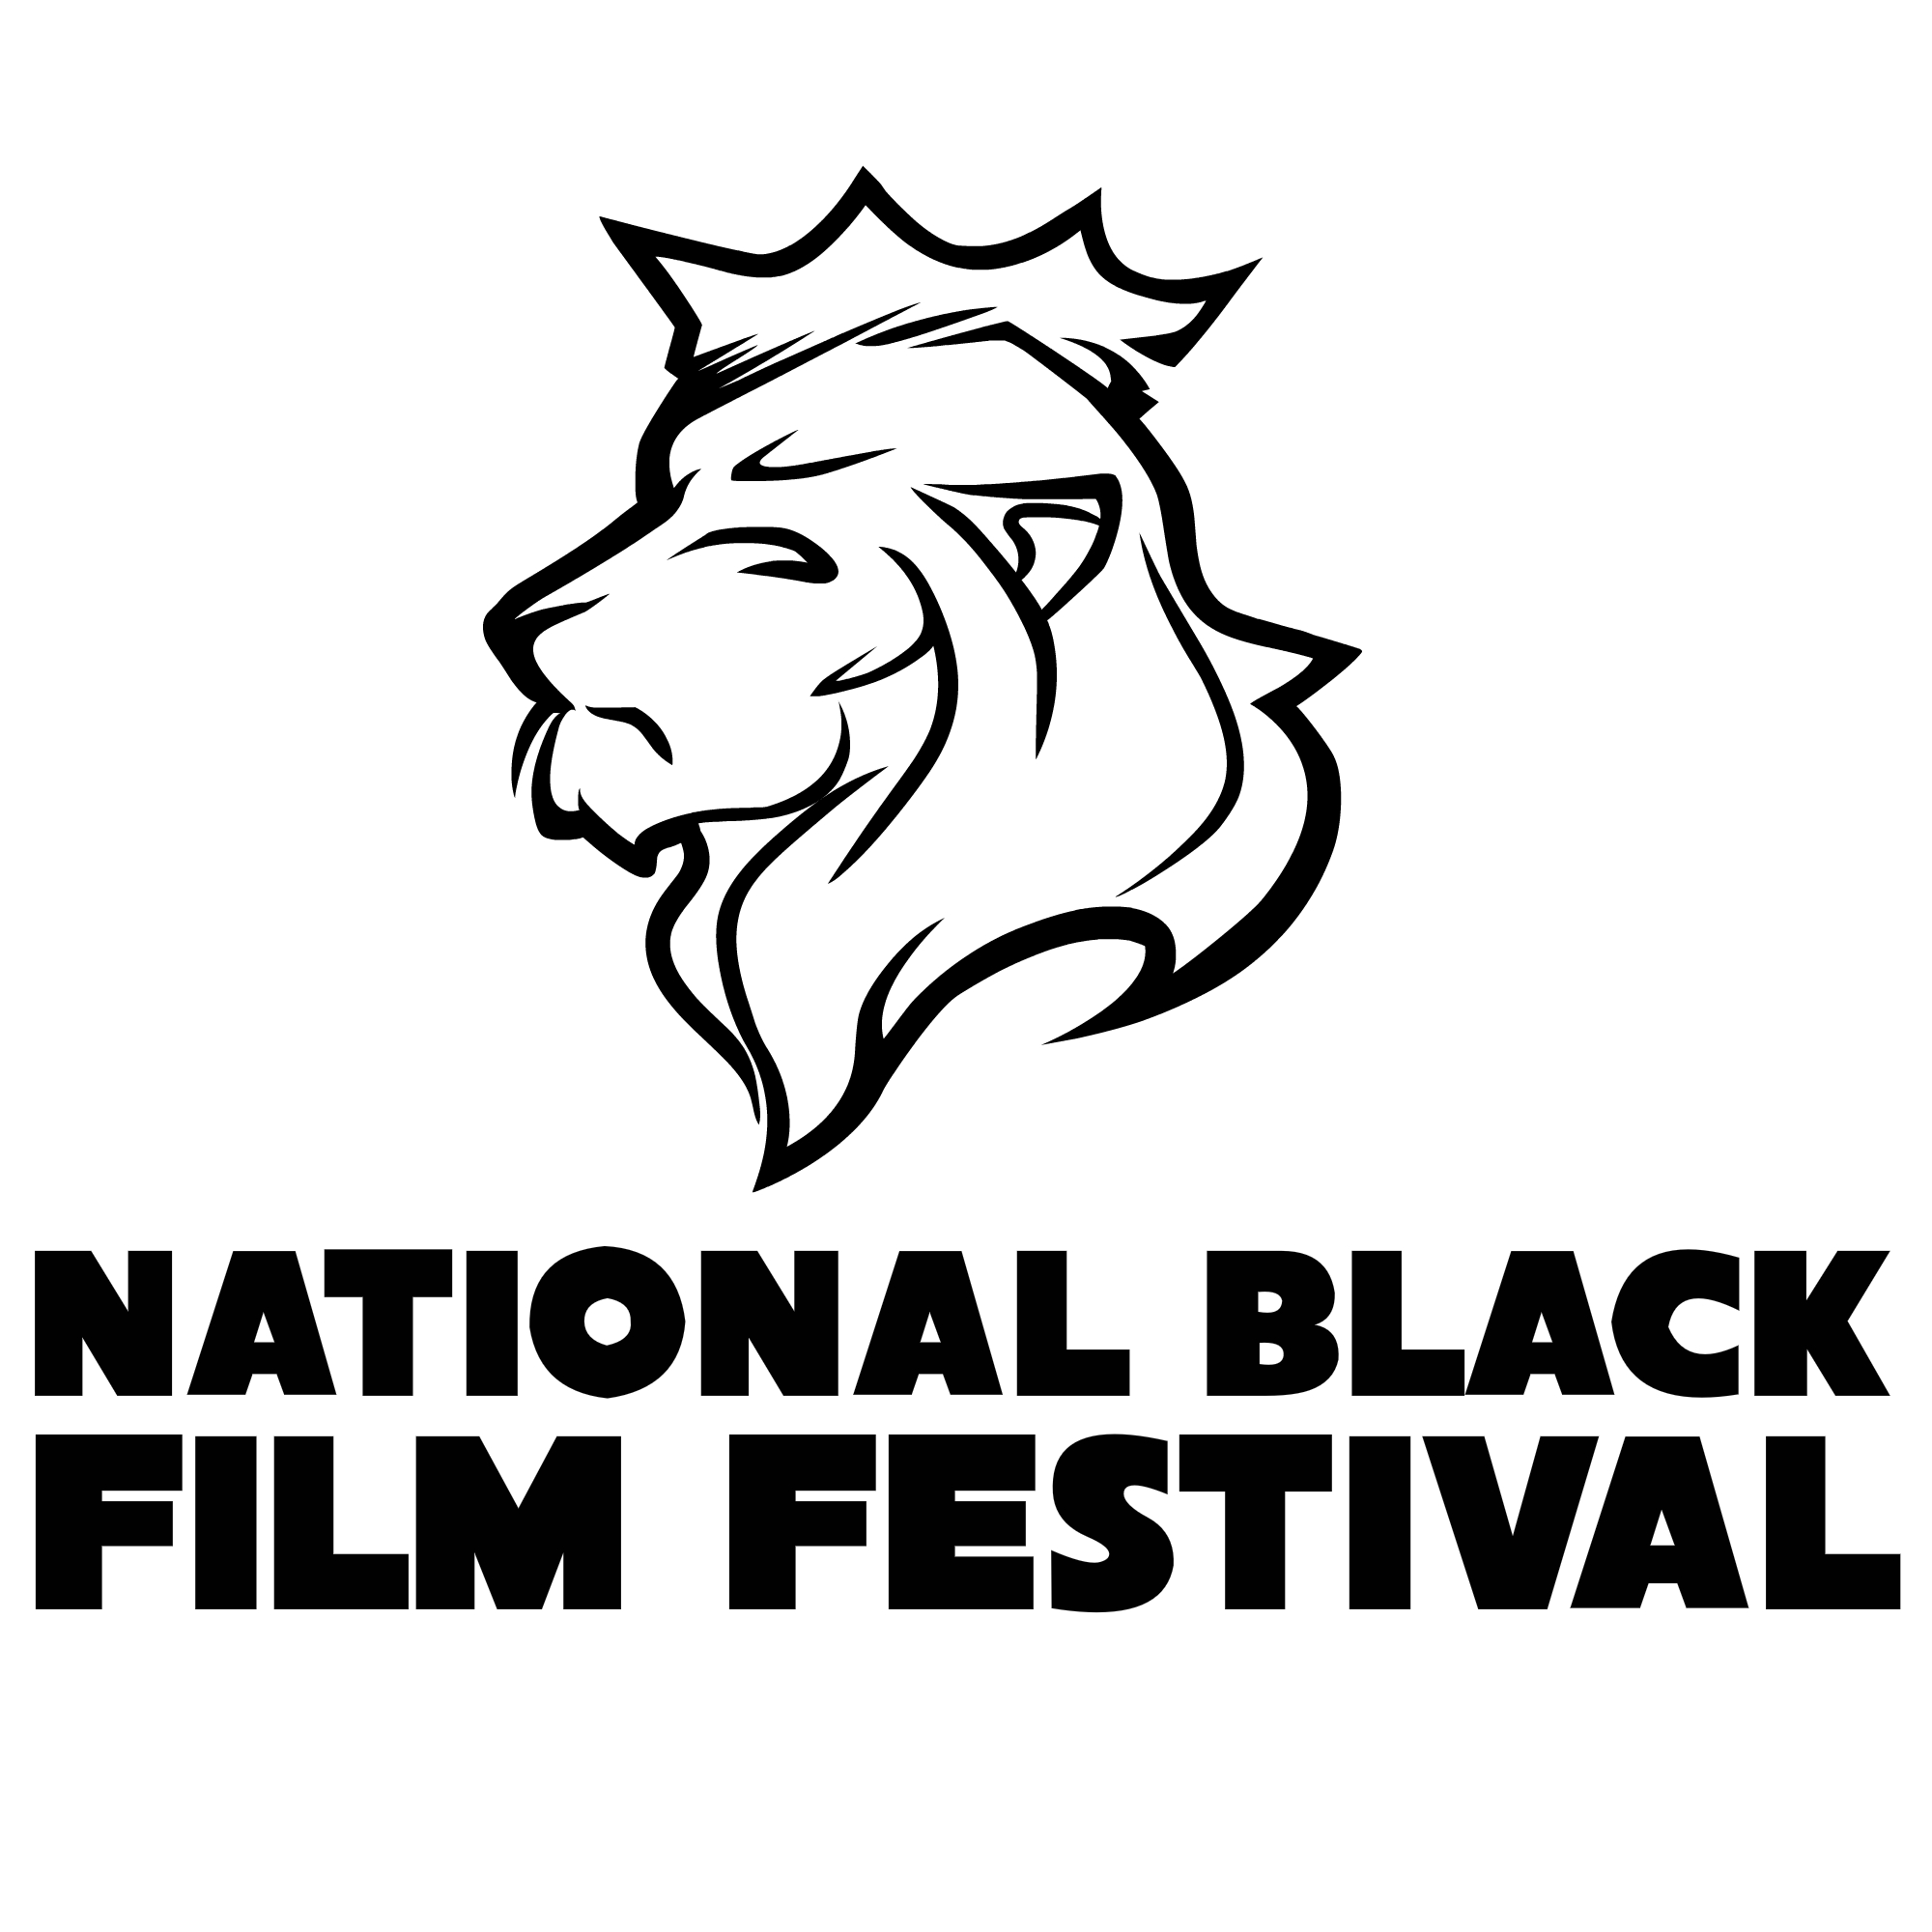 The 3rd Annual National Black Film Festival brings Sweetness to HTown